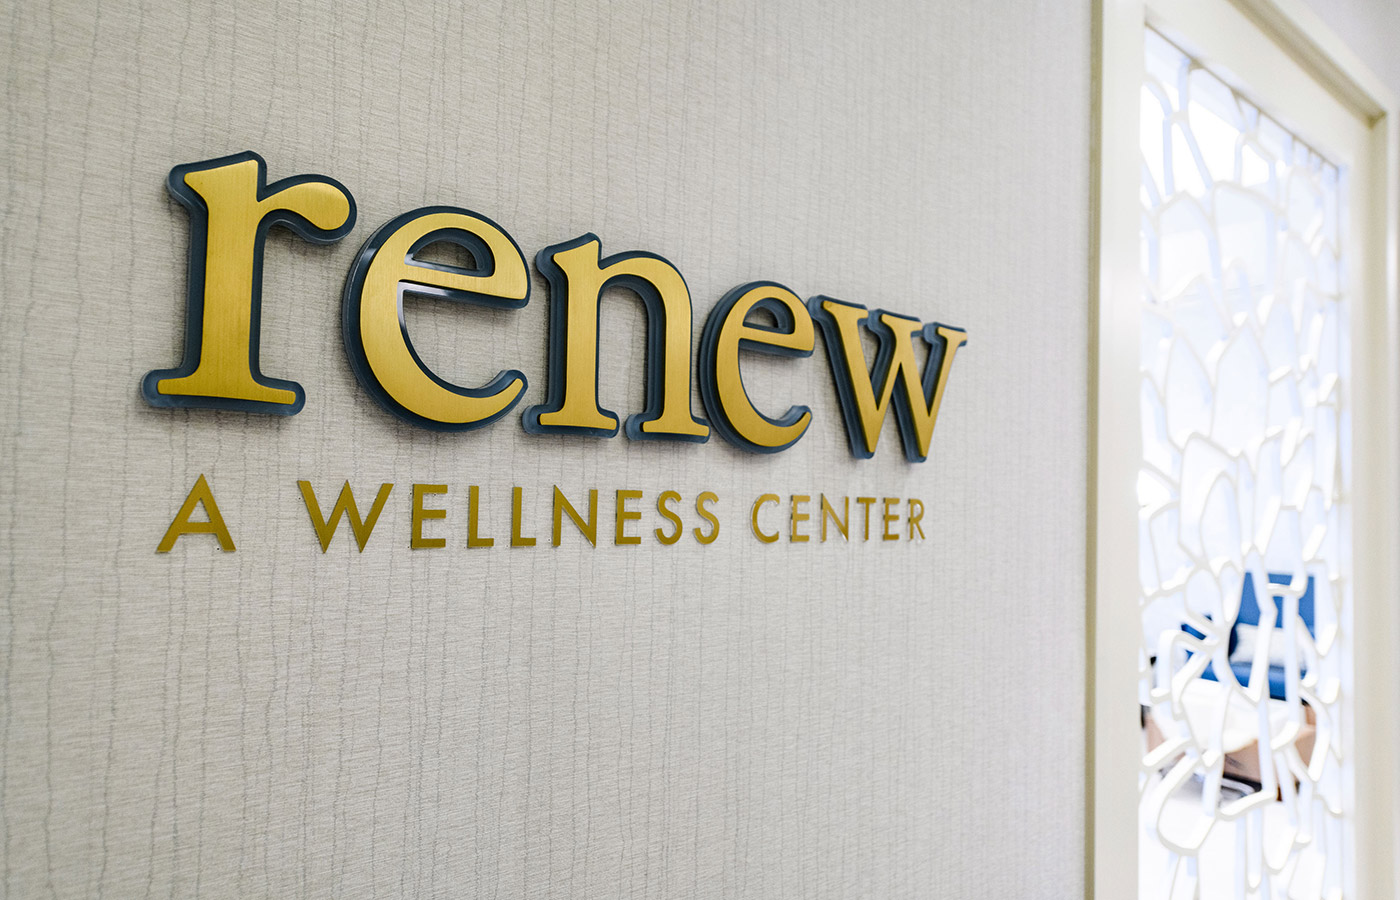 The Renew Wellness Center sign at The Watermark at Houston Heights.